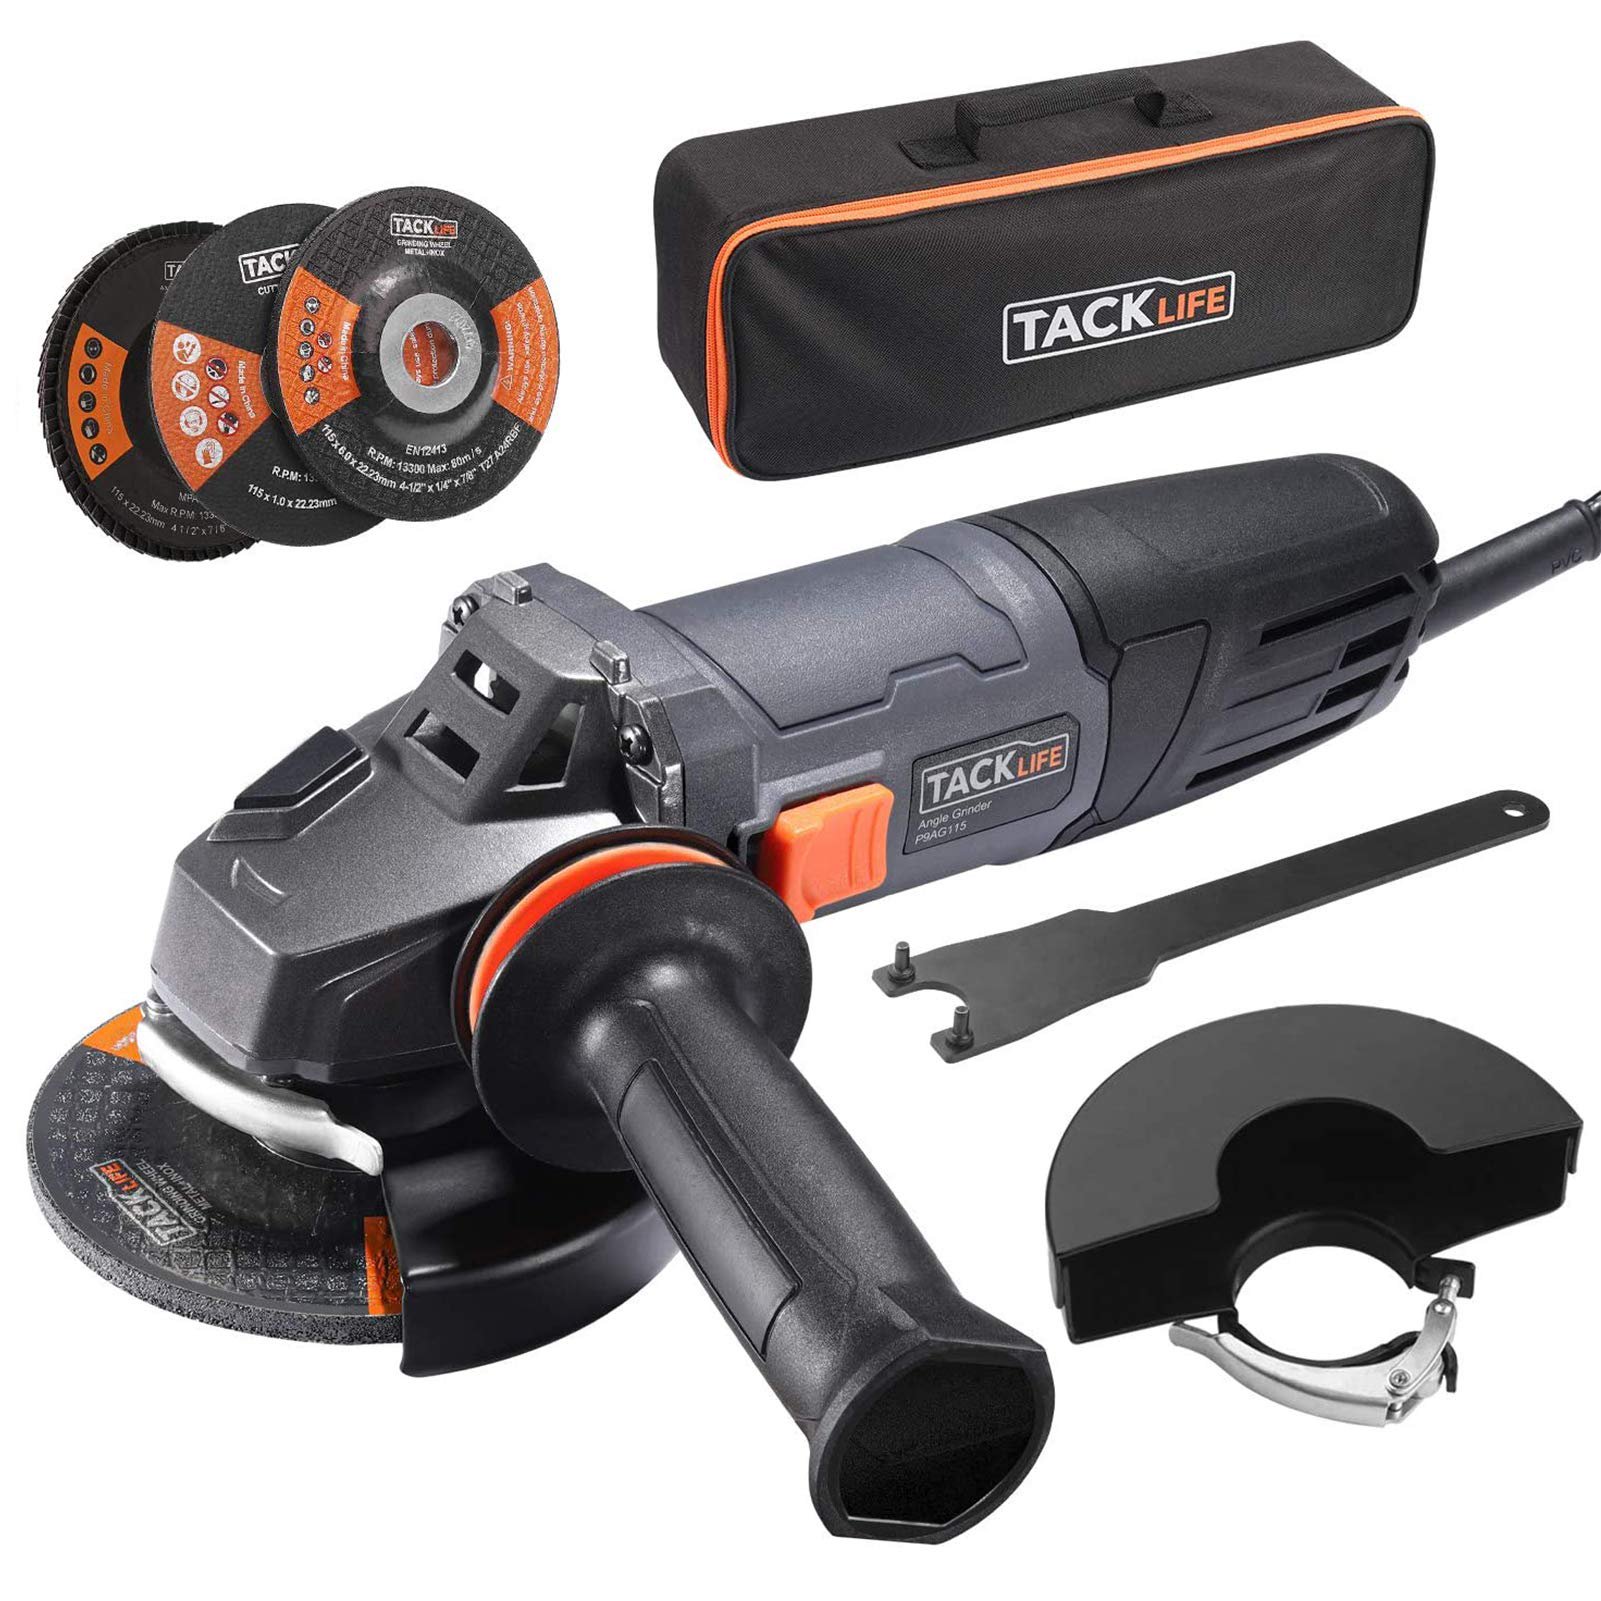 TACKLIFE 8.5Amp Angle Grinder Tool, 4-1/2-inch Angle Grinder 12000RPM, with  Anti-Vibration Handle P9AG115